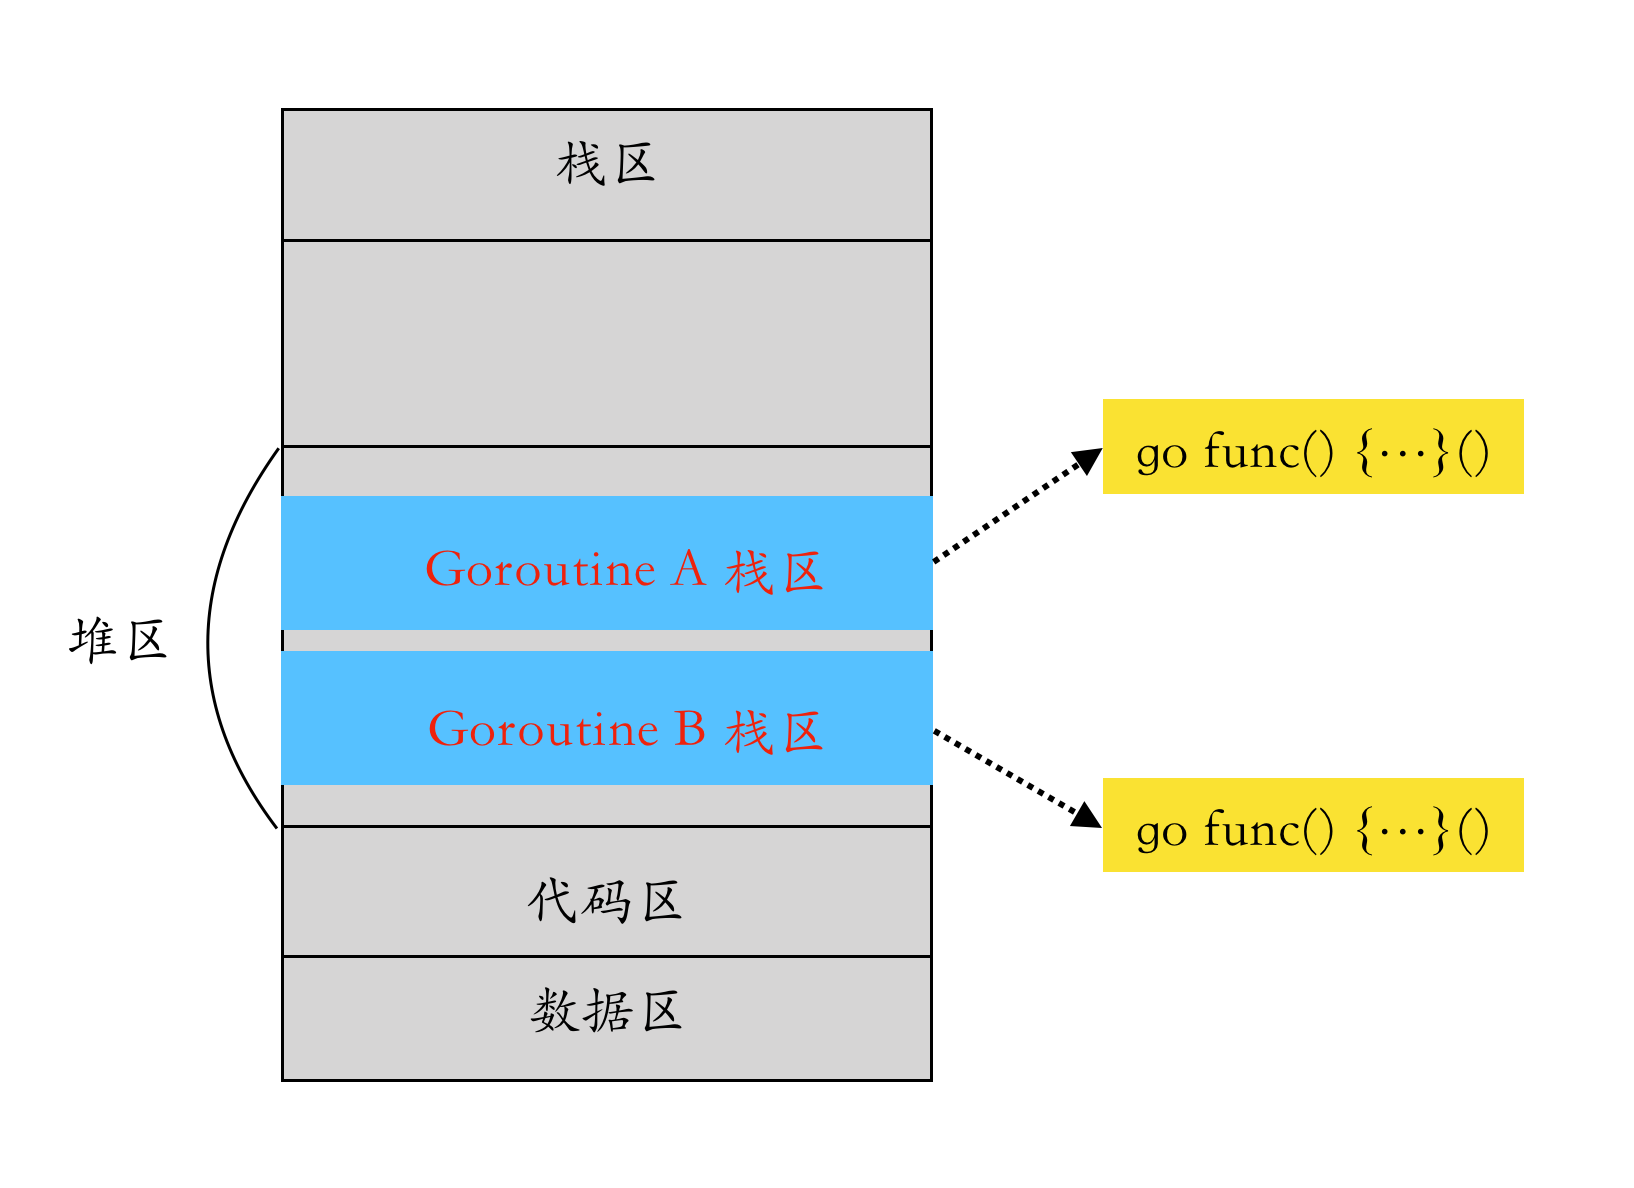 Distribution of goroutines in the process memory space